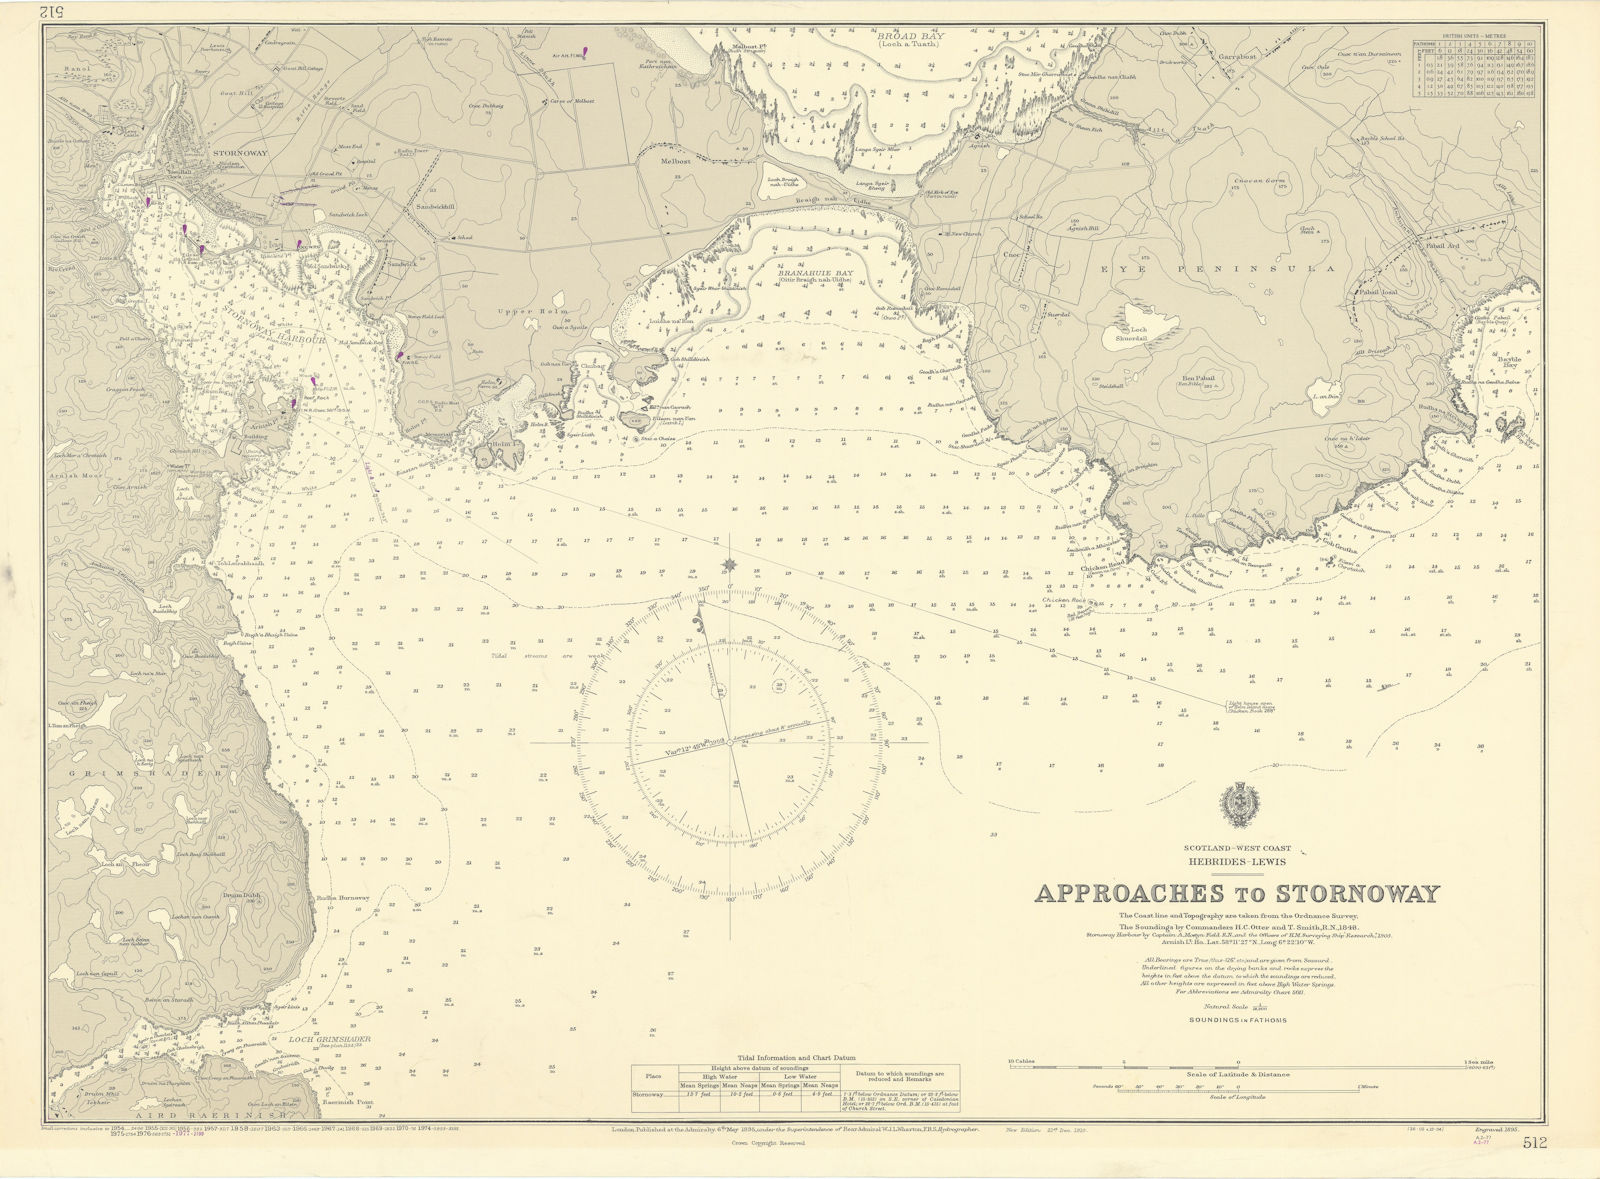 Stornoway approaches Hebrides Lewis Scotland ADMIRALTY sea chart 1895 (1977) map